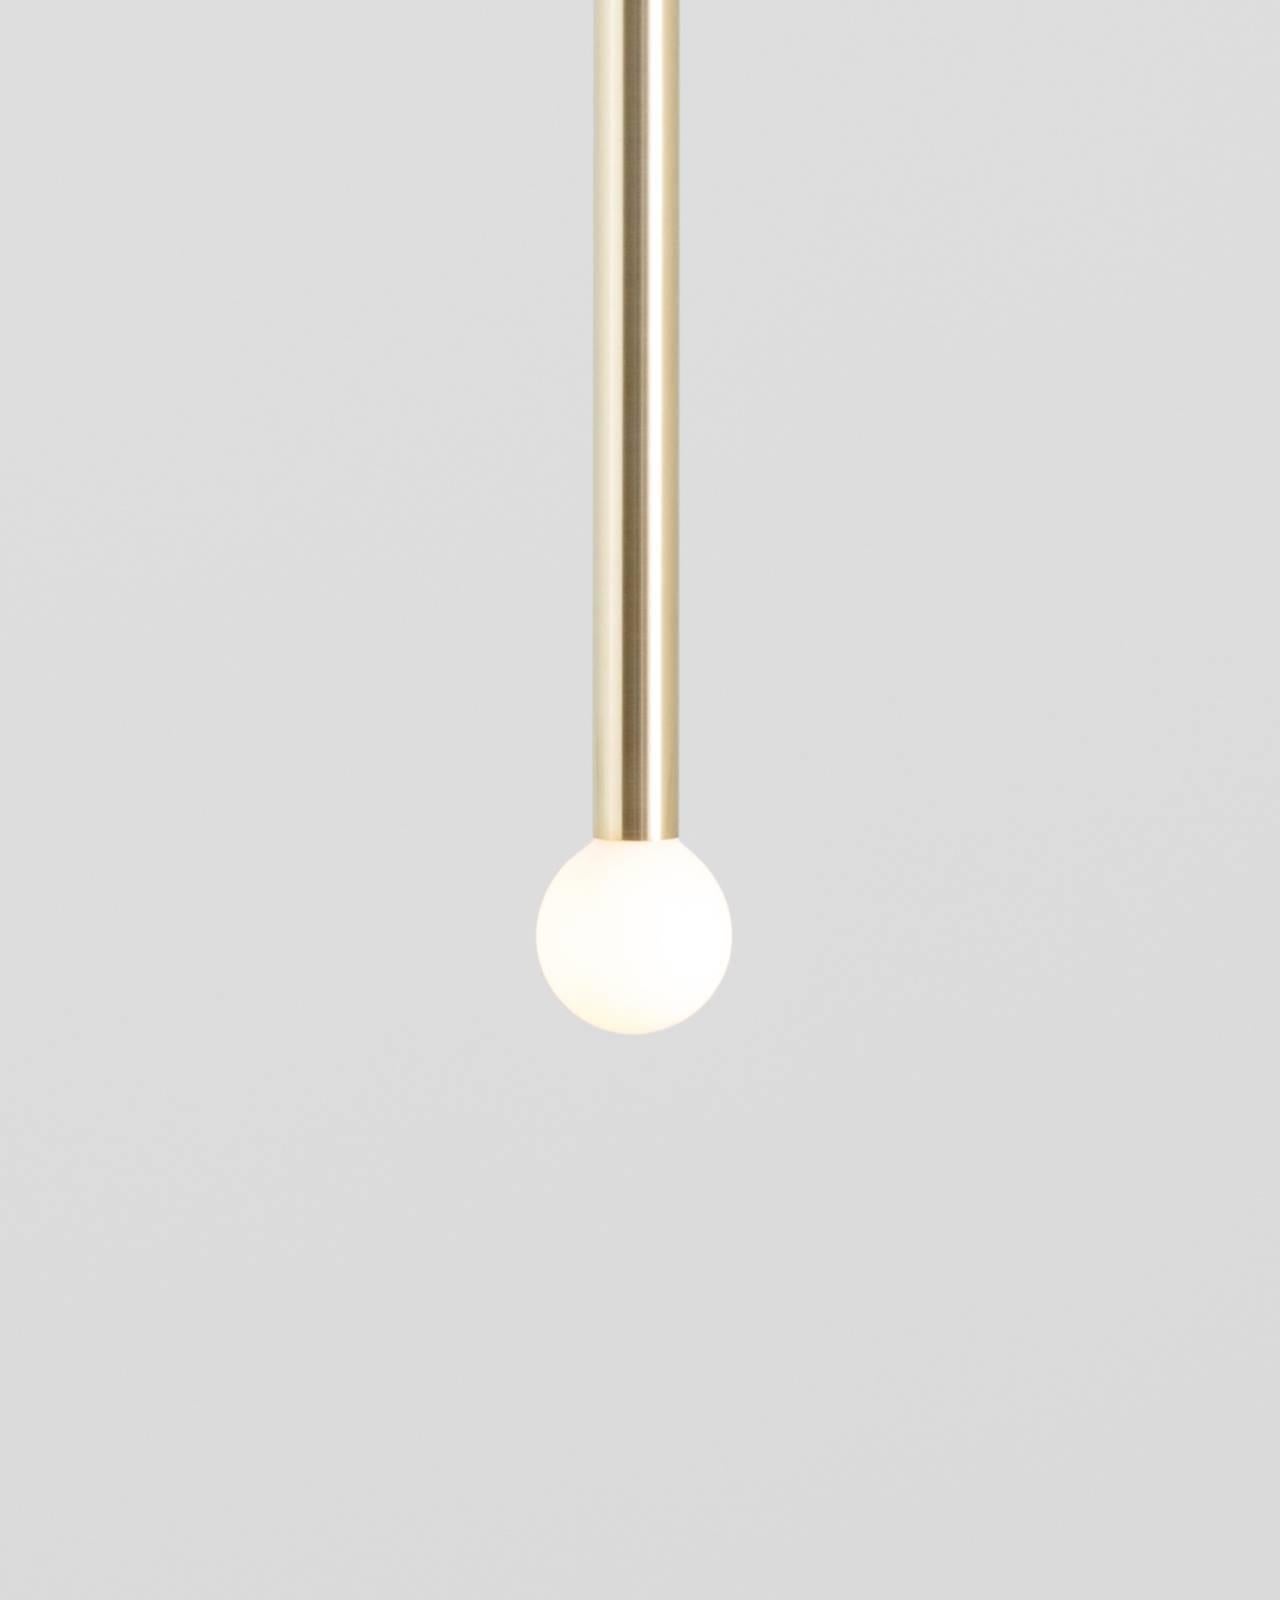 Inspired by the simple form of a matchstick, Strike’s playful sophistication is born from simple geometric shapes combined with a refined sense of scale. A versatile light, Strike can be displayed as a single pendant or arranged in groupings to